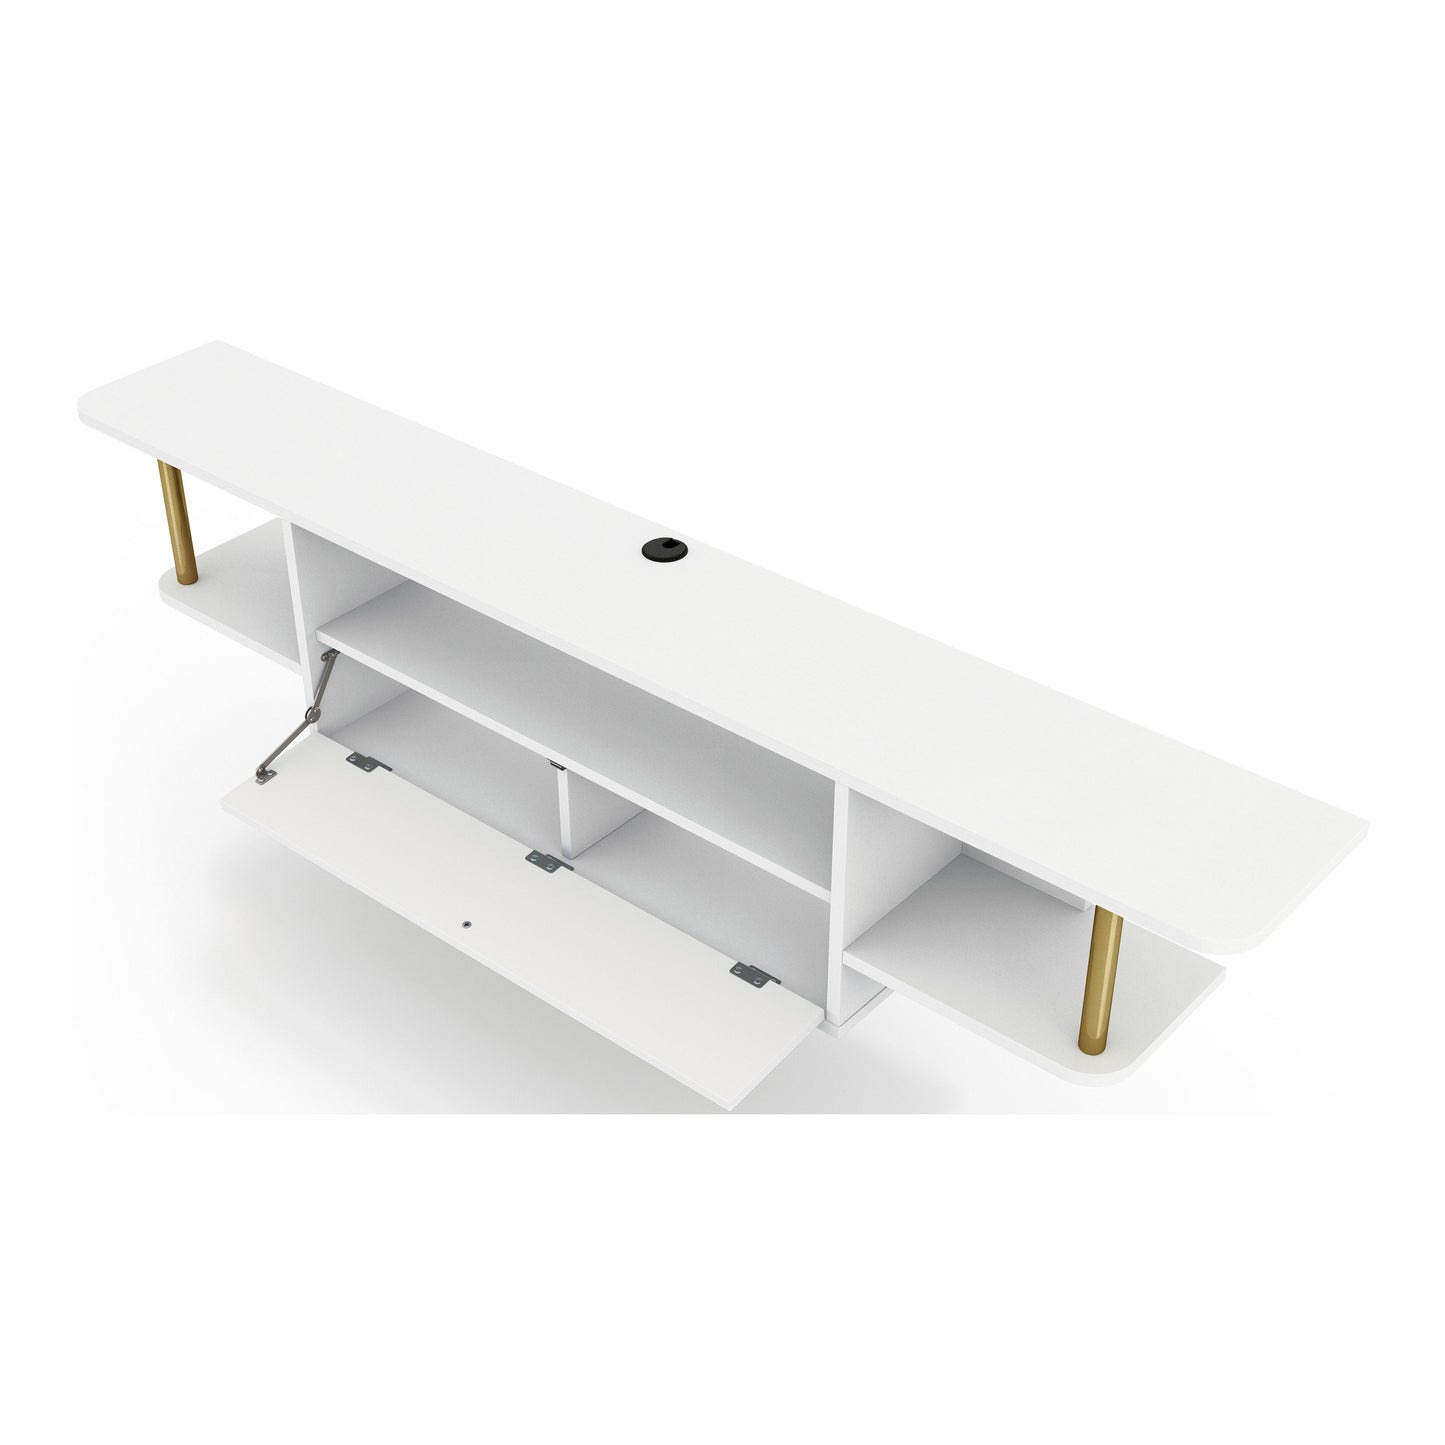 Left angled bird's eye view of a modern white and gold three-shelf floating TV stand with drop-front door open on a white background